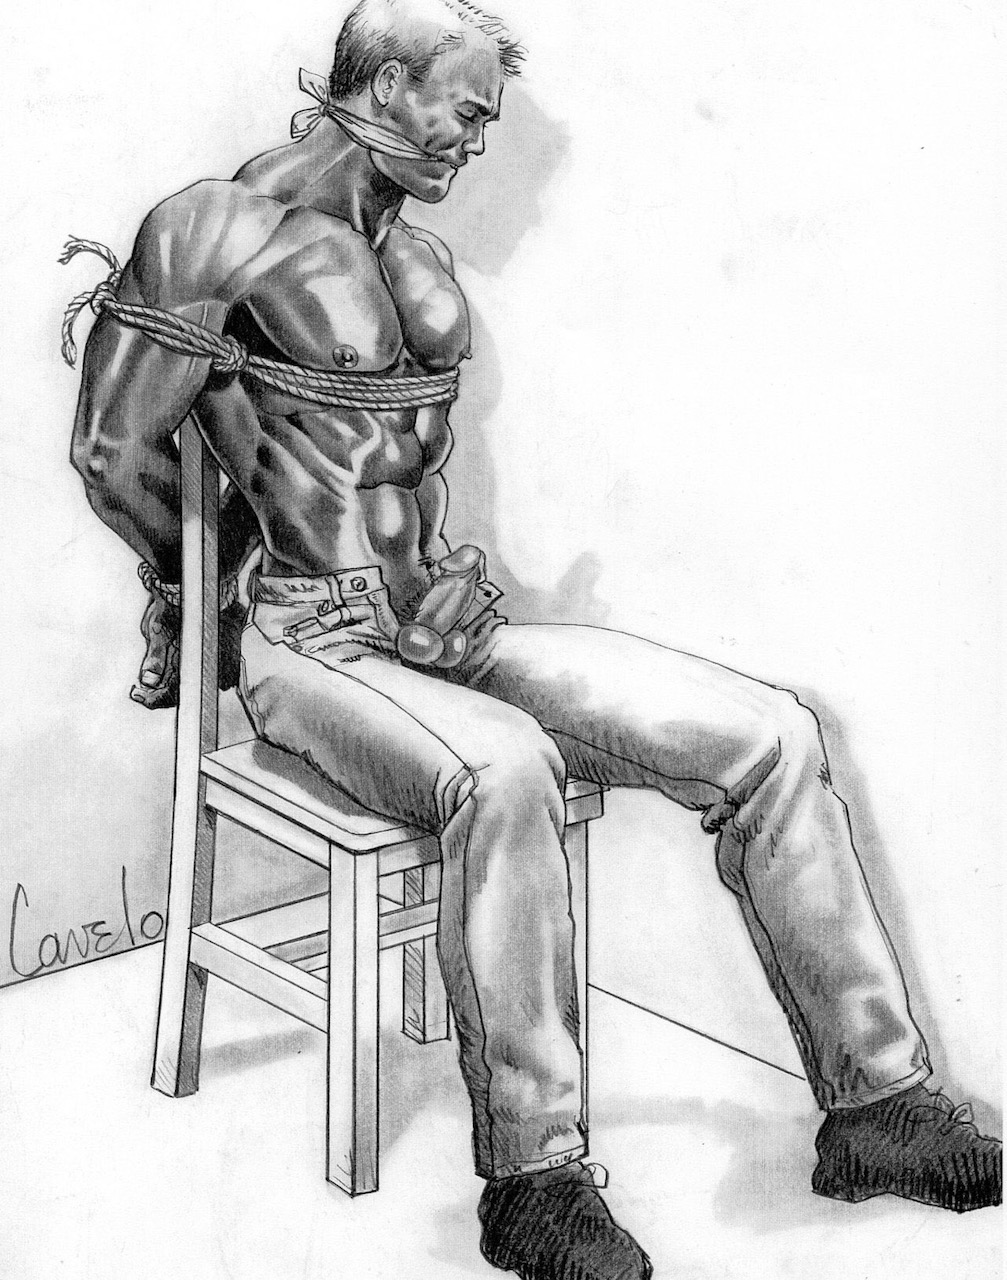 Vintage pictures: The male BDSM artwork of Cavelo